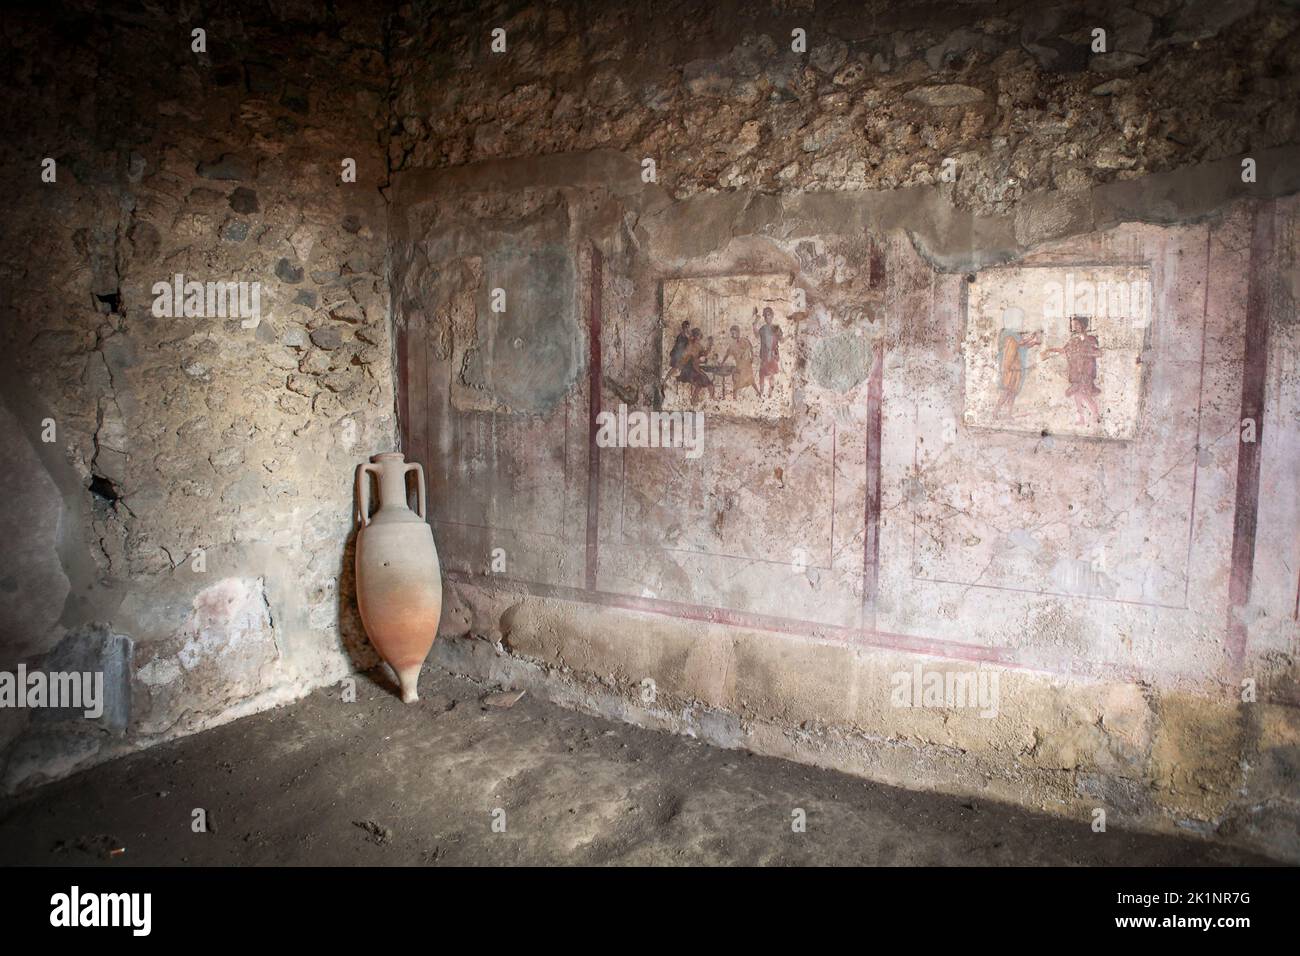 frescos and an amphora in a room in Pompeii, Italy Stock Photo